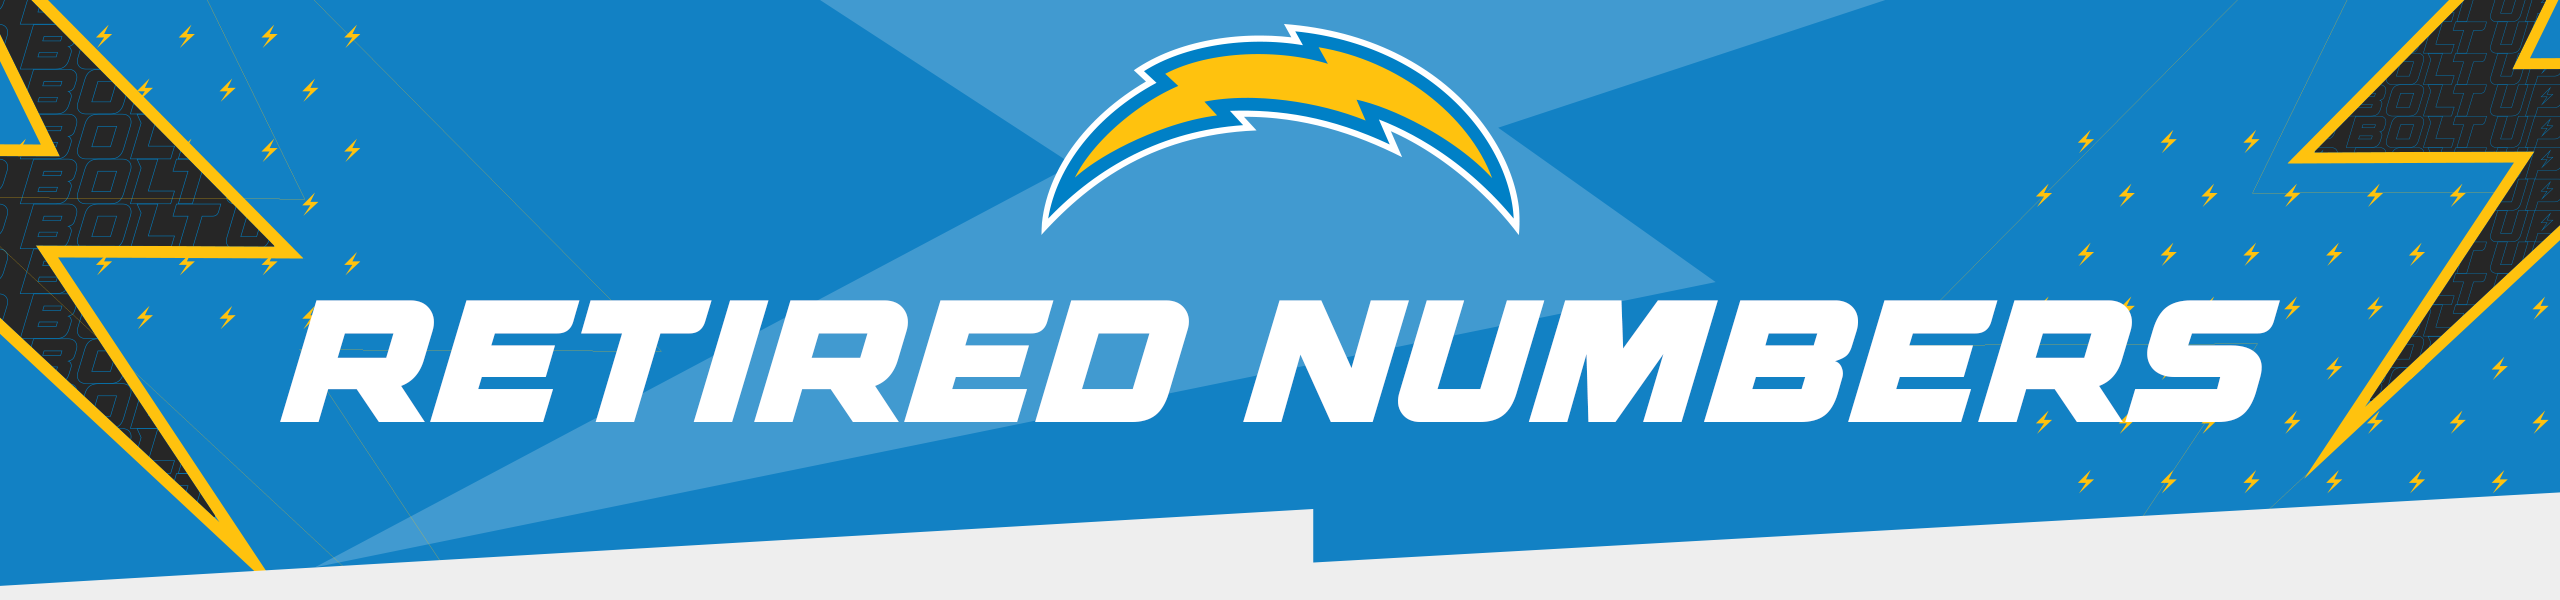 Los Angeles Chargers retired numbers - Wikipedia